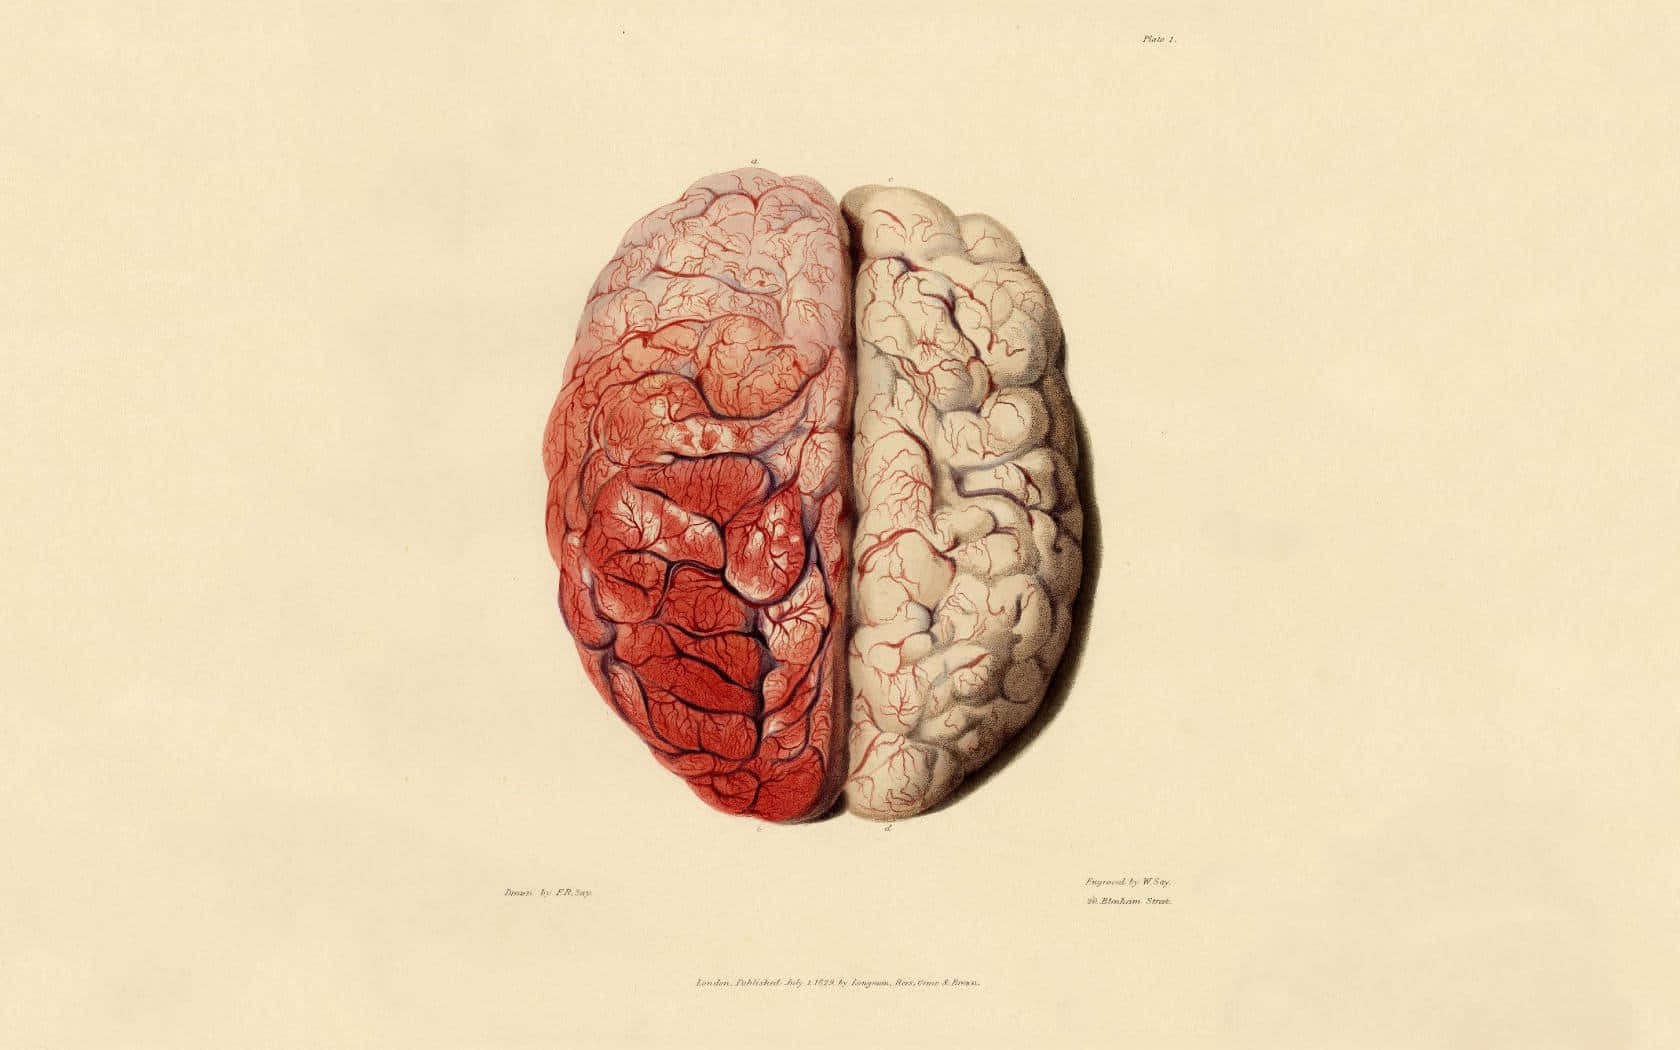 A Drawing Of A Human Brain With Red Blood Wallpaper